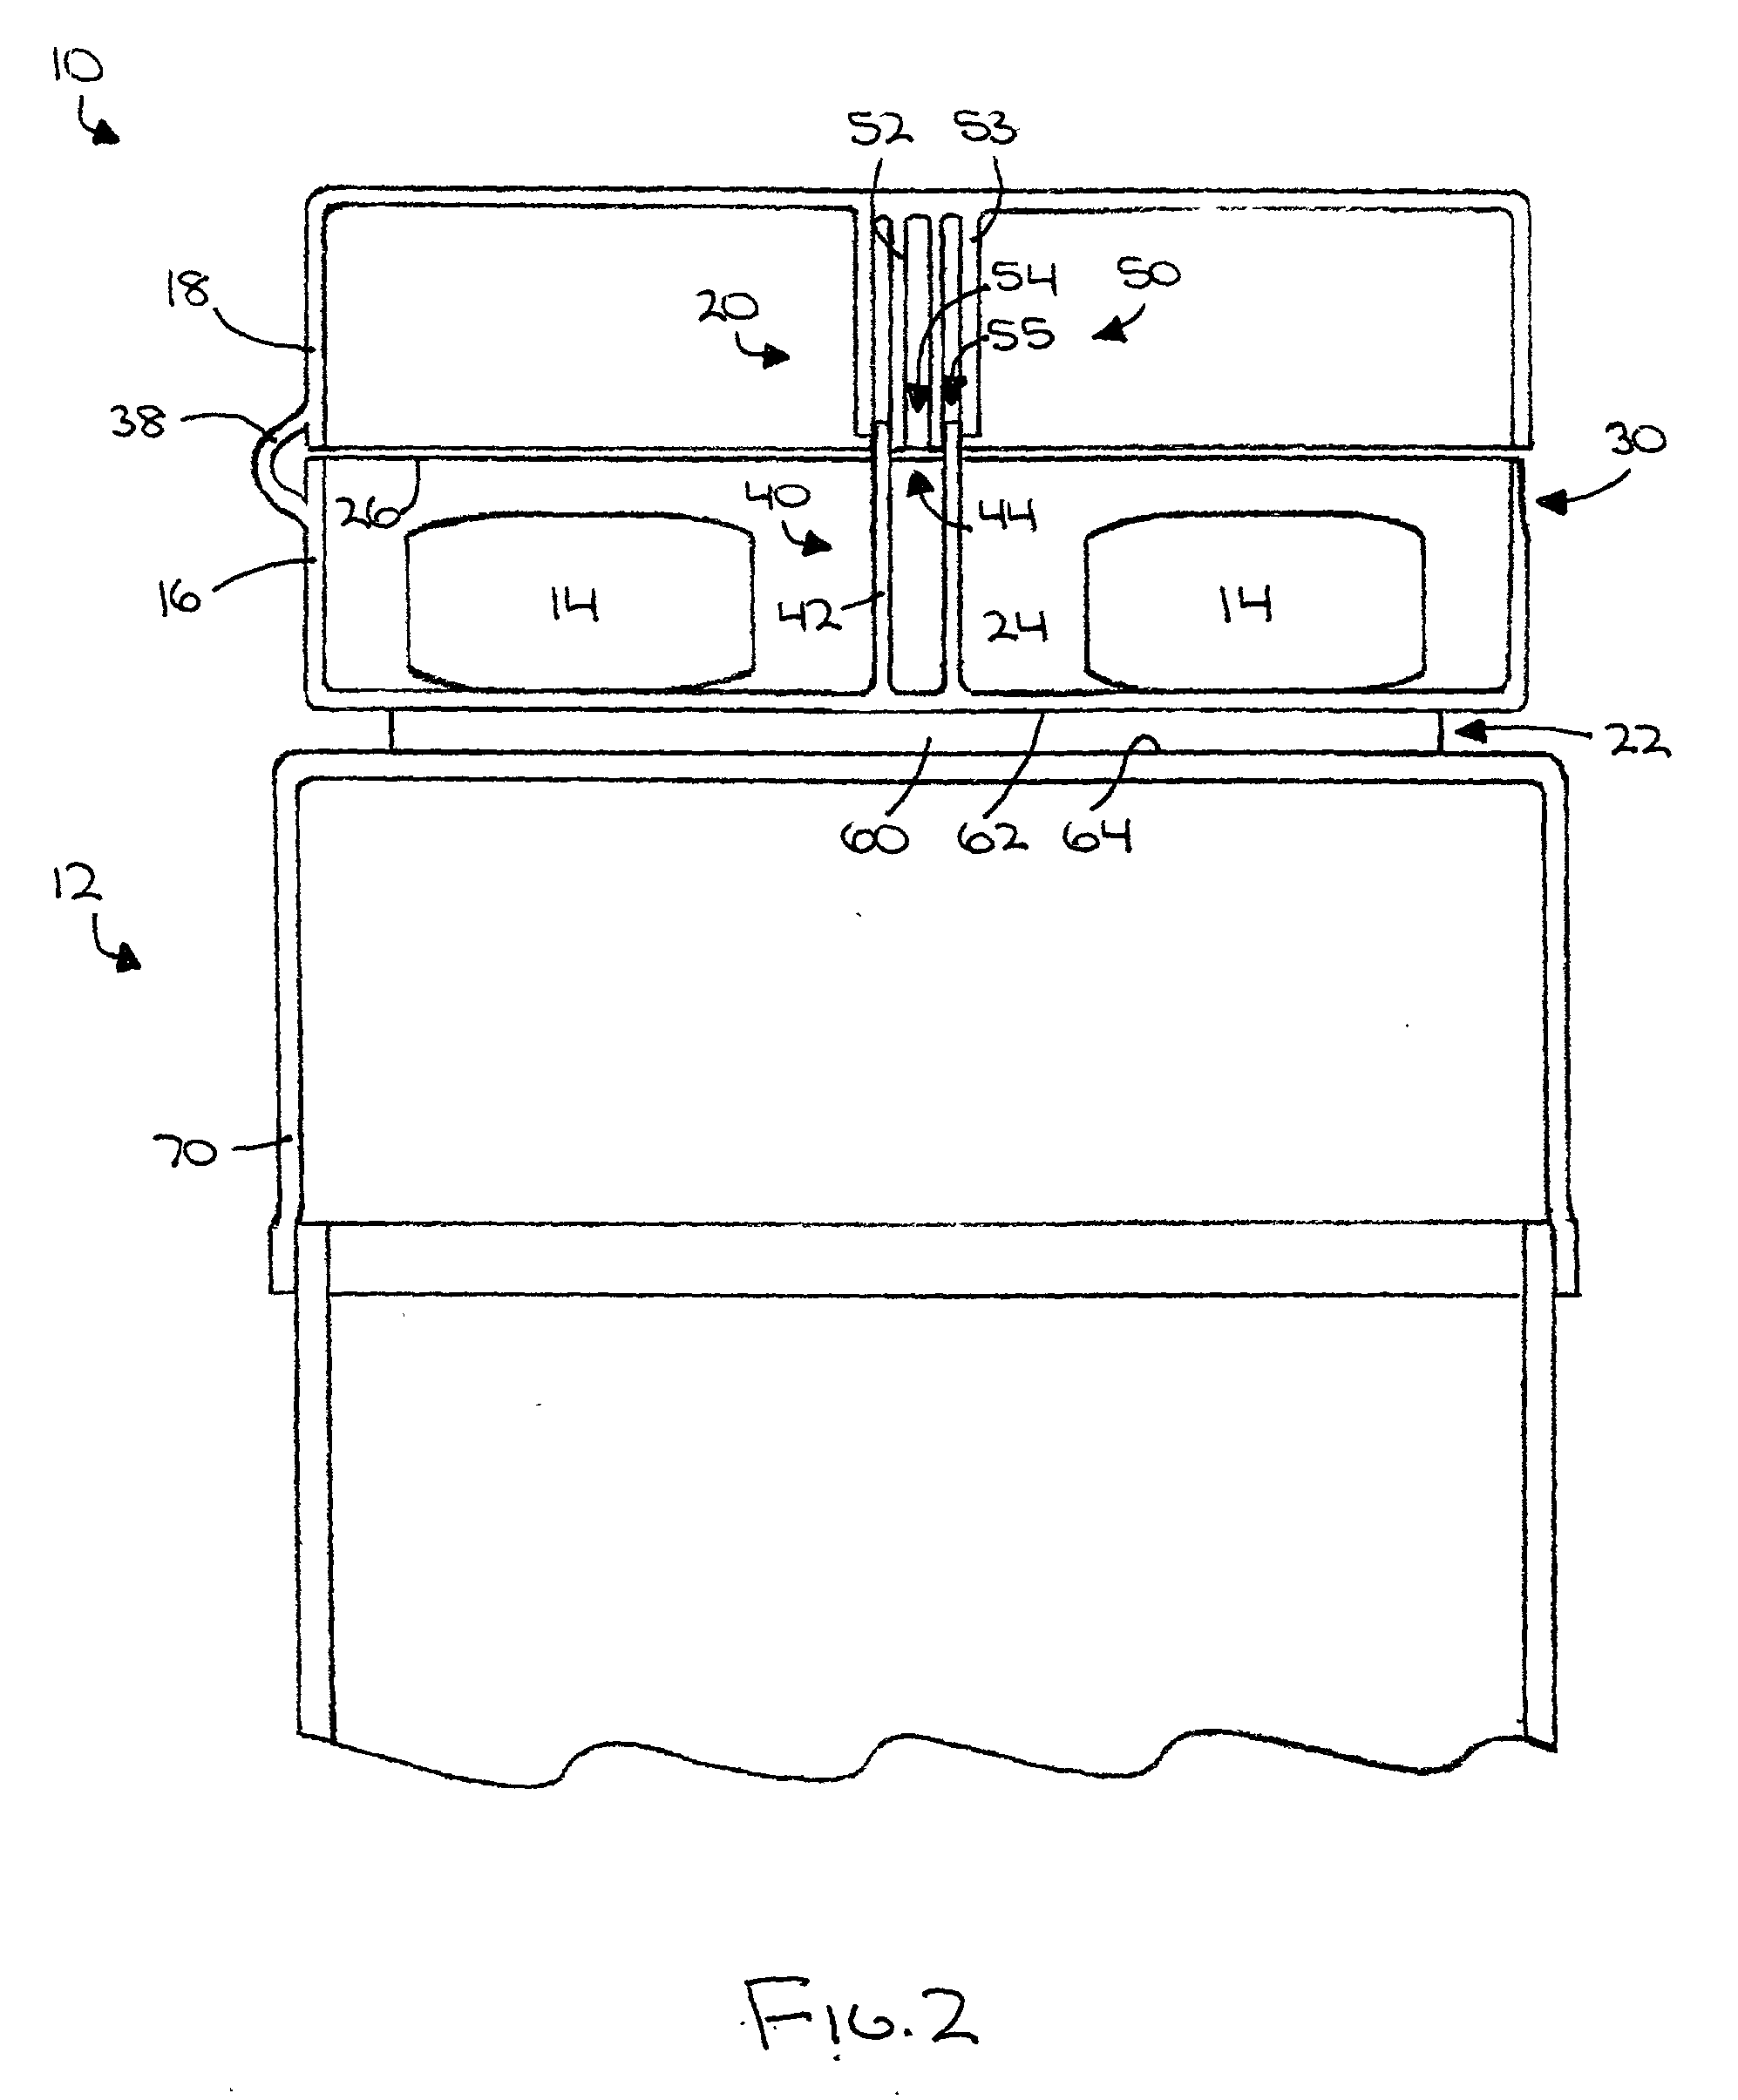 Auxiliary container for physical association with conventional medication container